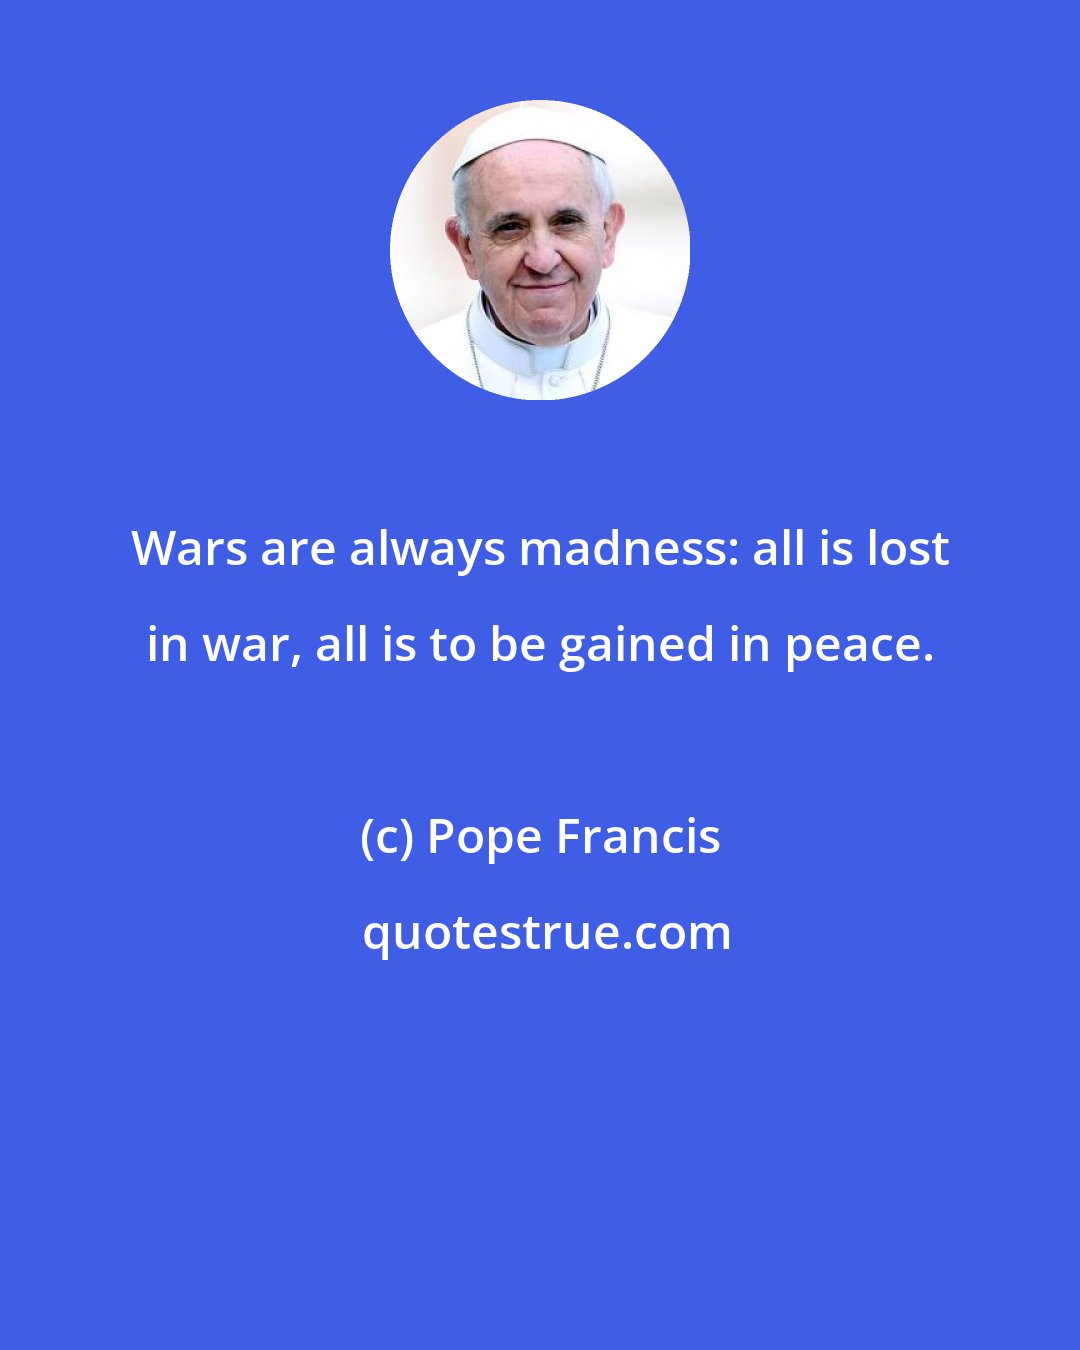 Pope Francis: Wars are always madness: all is lost in war, all is to be gained in peace.